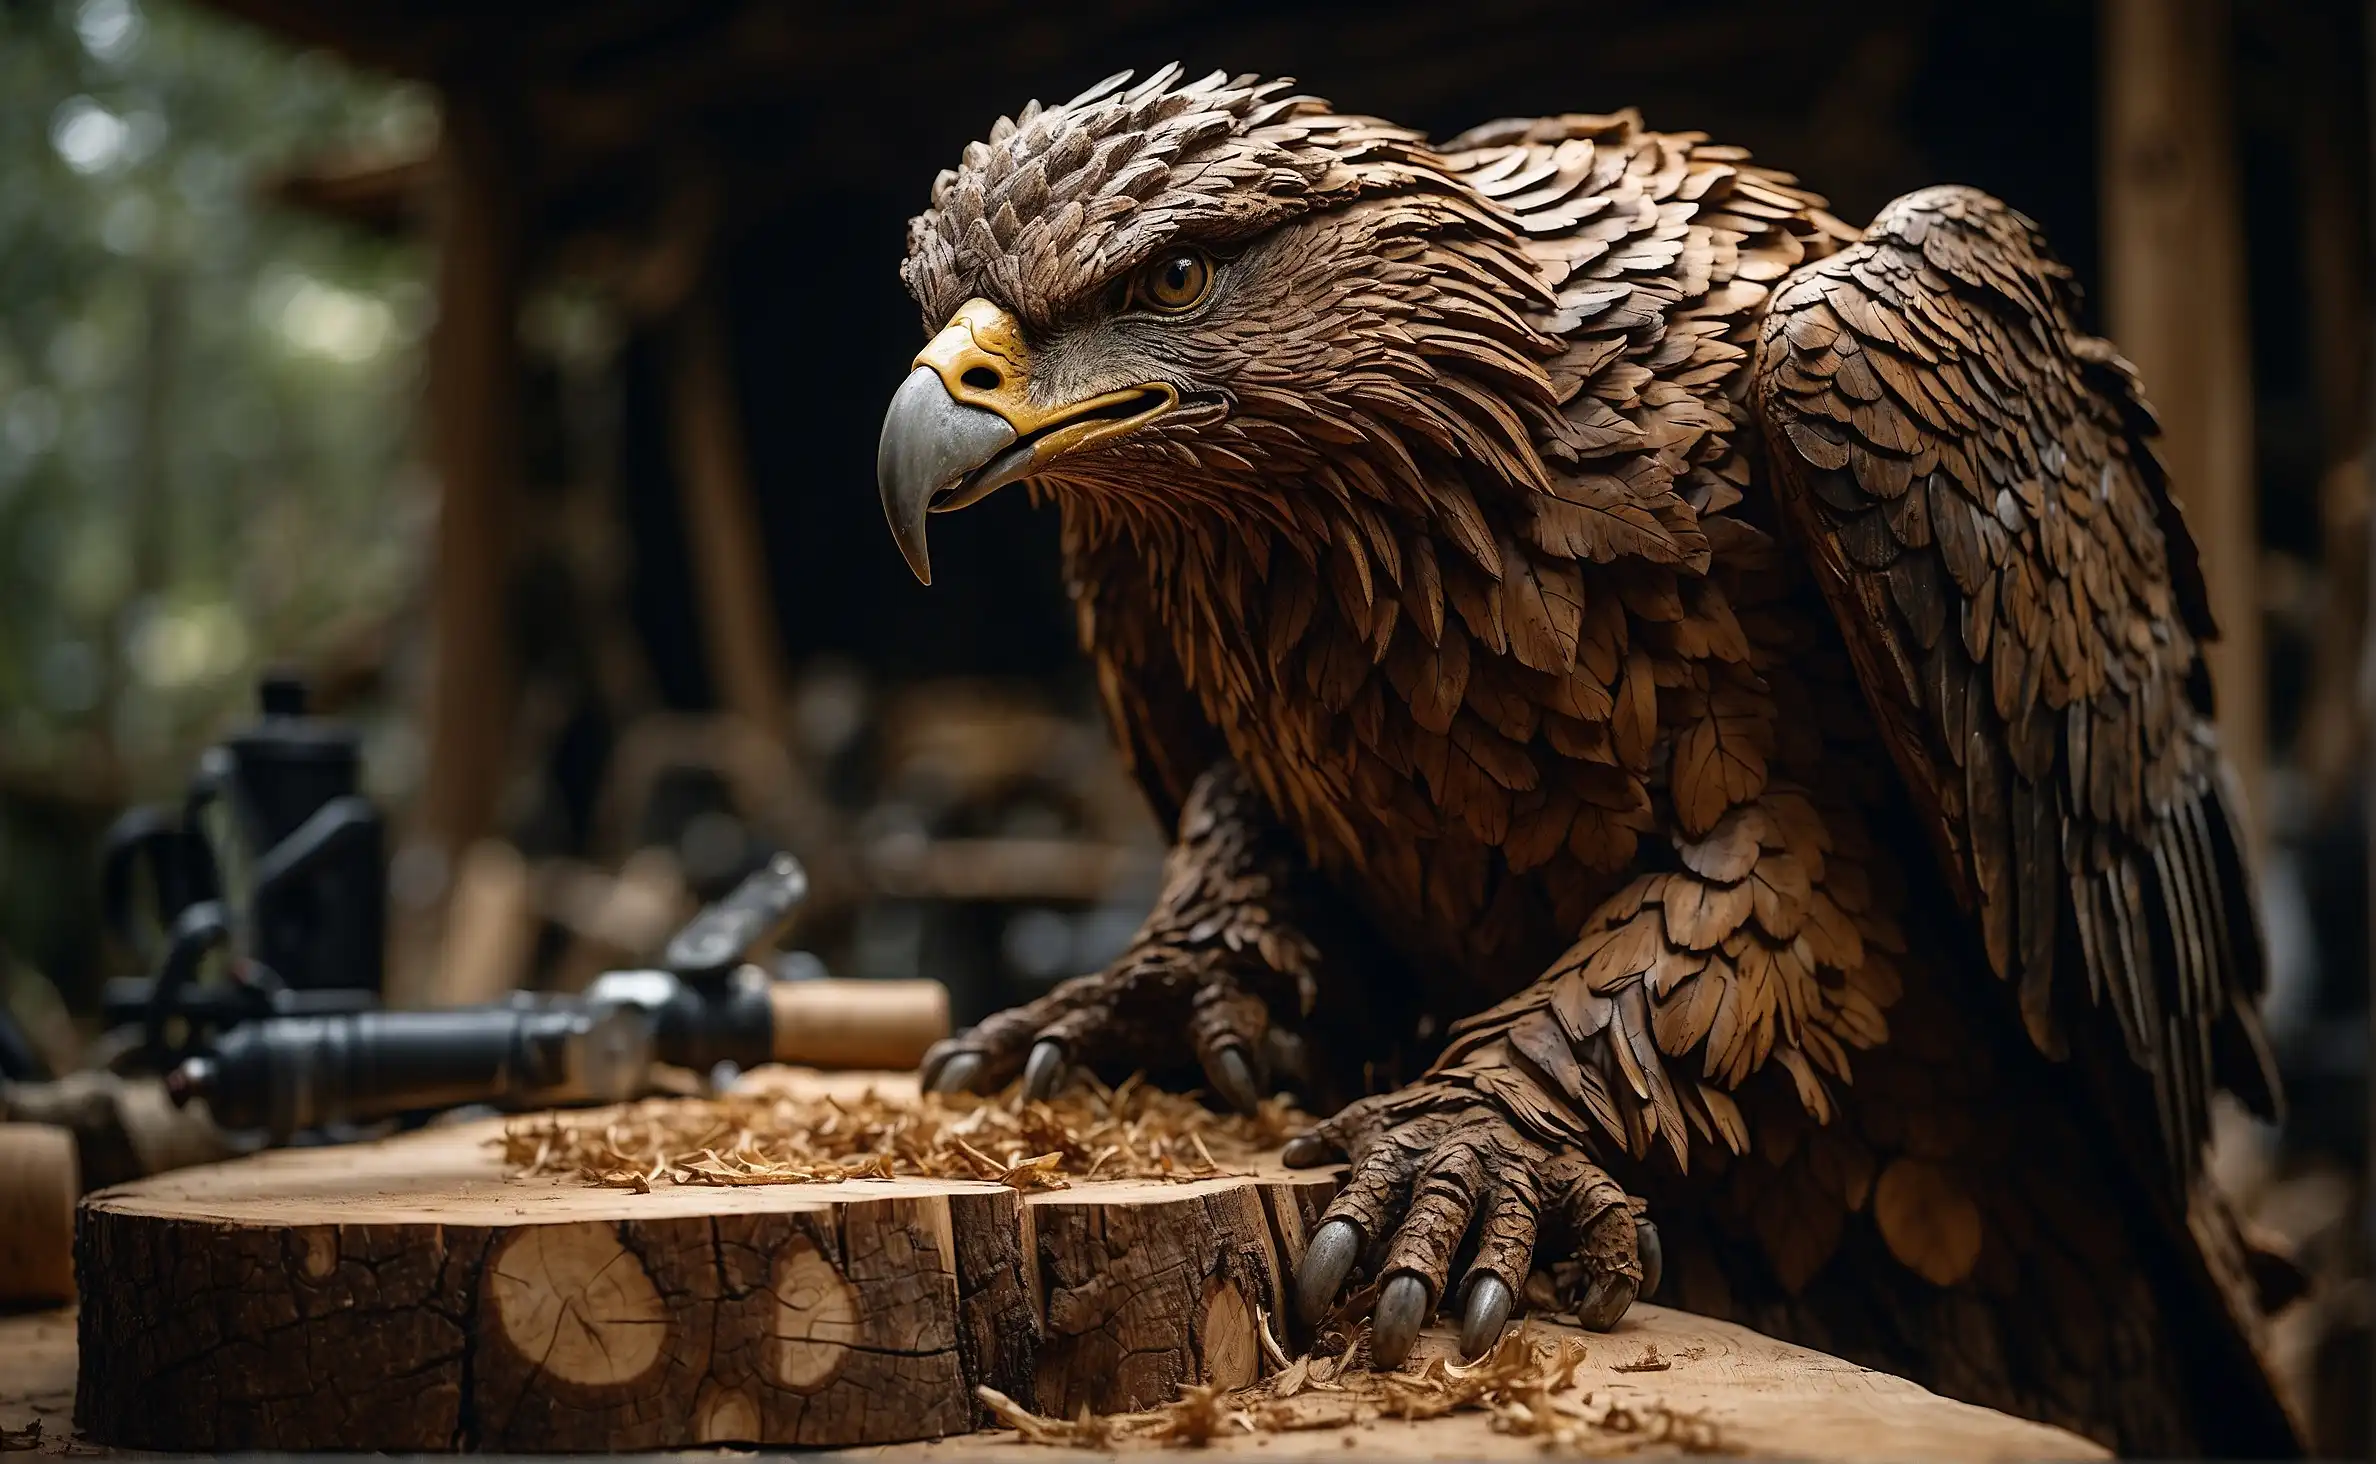 Chainsaw Carve, a skillful artist meticulously carving a majestic eagle from a large oak log